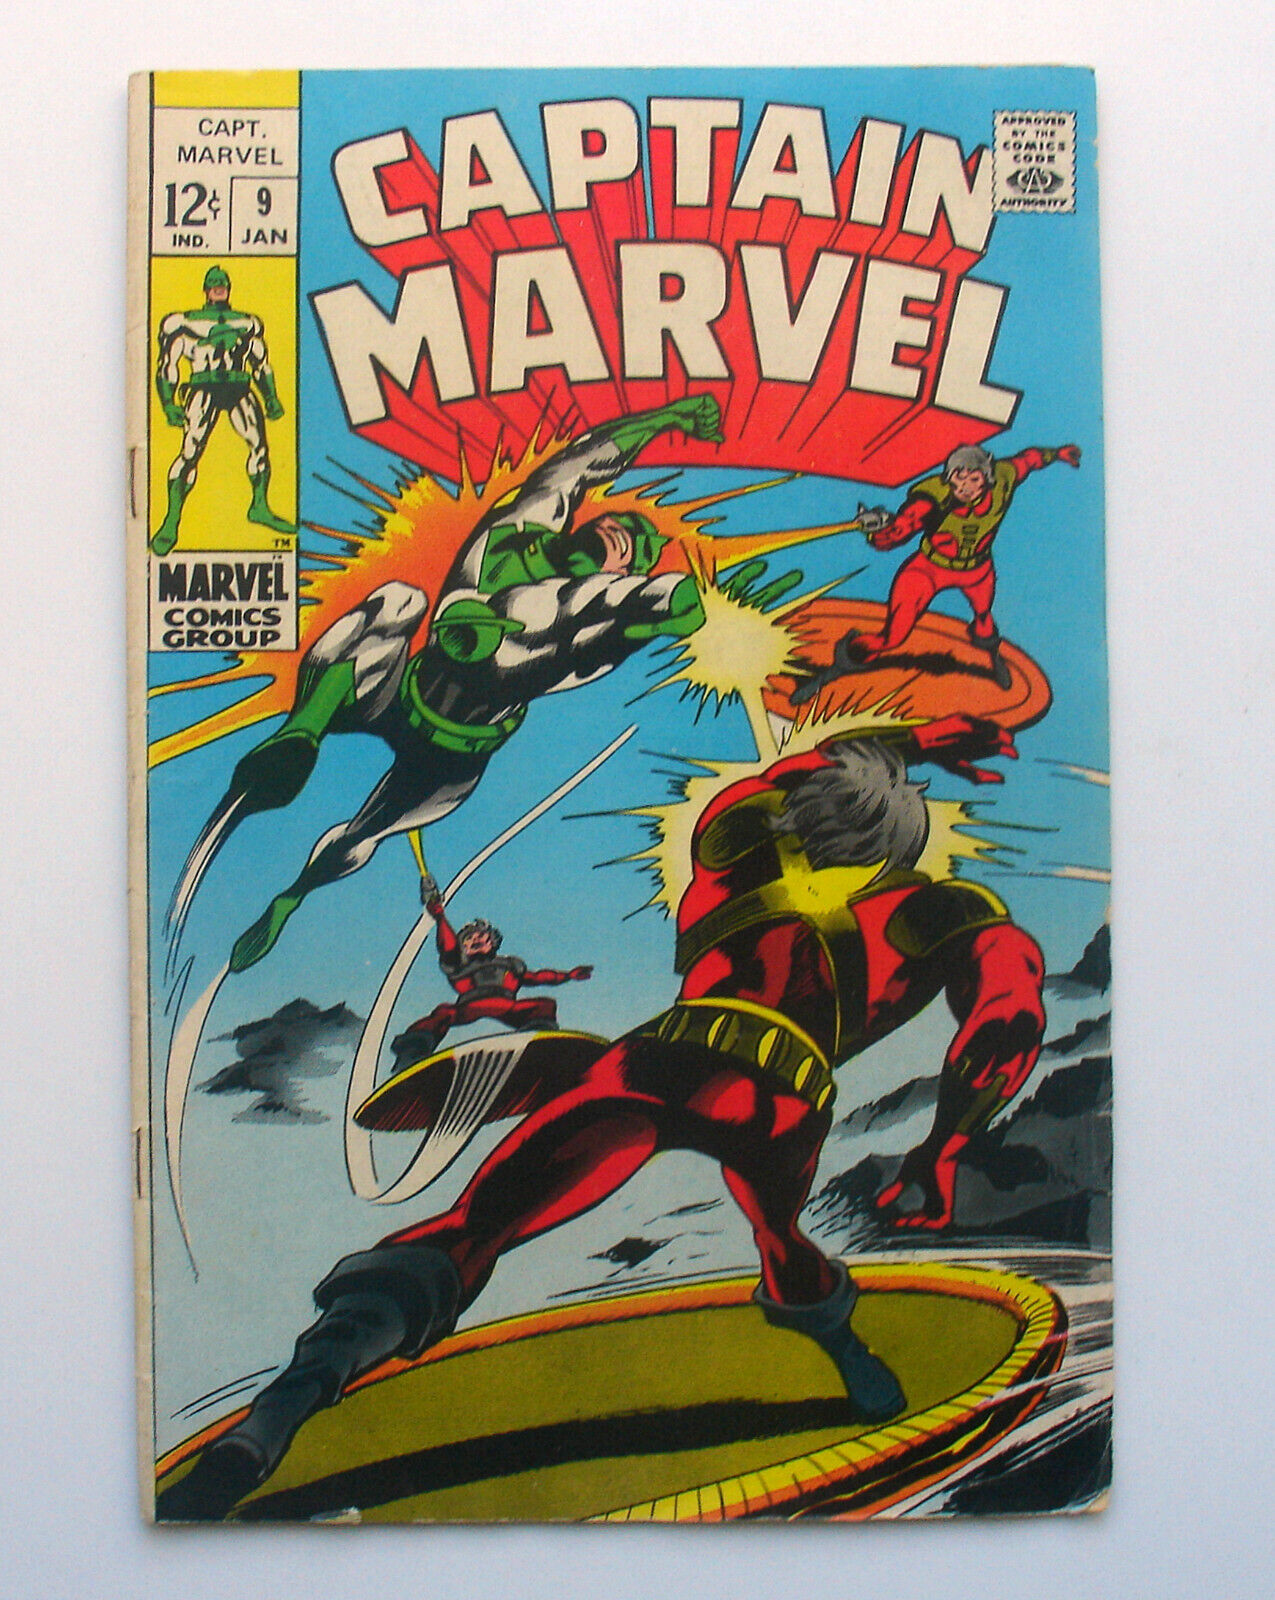 Captain Marvel #9 - January, 1969 - Silver Age Comic - Between Hammer And Anvil